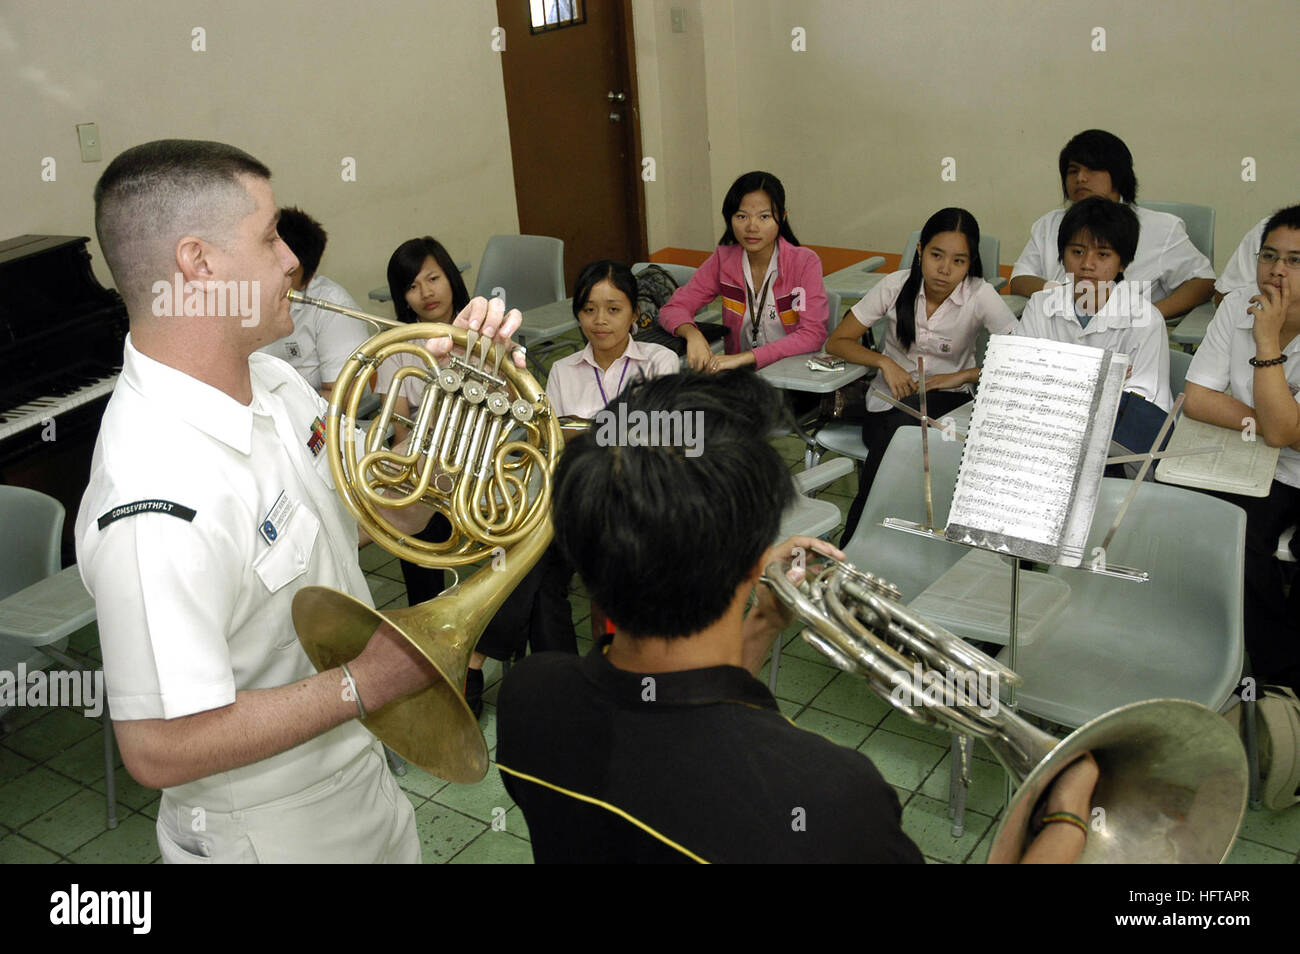 070209-N-2746N-111 Manila, Philippines (Feb. 9, 2007) - Musician 2nd Class Robert Booker, assigned to the 7th Fleet Band, instructs Karlo Espirito of the University of Santo Tomas Conservatory of Music and fellow students on the ins-and-outs of the French horn during a master class held at the university. Amphibious command ship USS Blue Ridge (LCC 19) and embarked 7th Fleet staff are in the Philippines as part of Project Friendship, a humanitarian assistance/community service project with the Armed Forces of the Philippines. Throughout their stay, the ship will participate in friendship-build Stock Photo